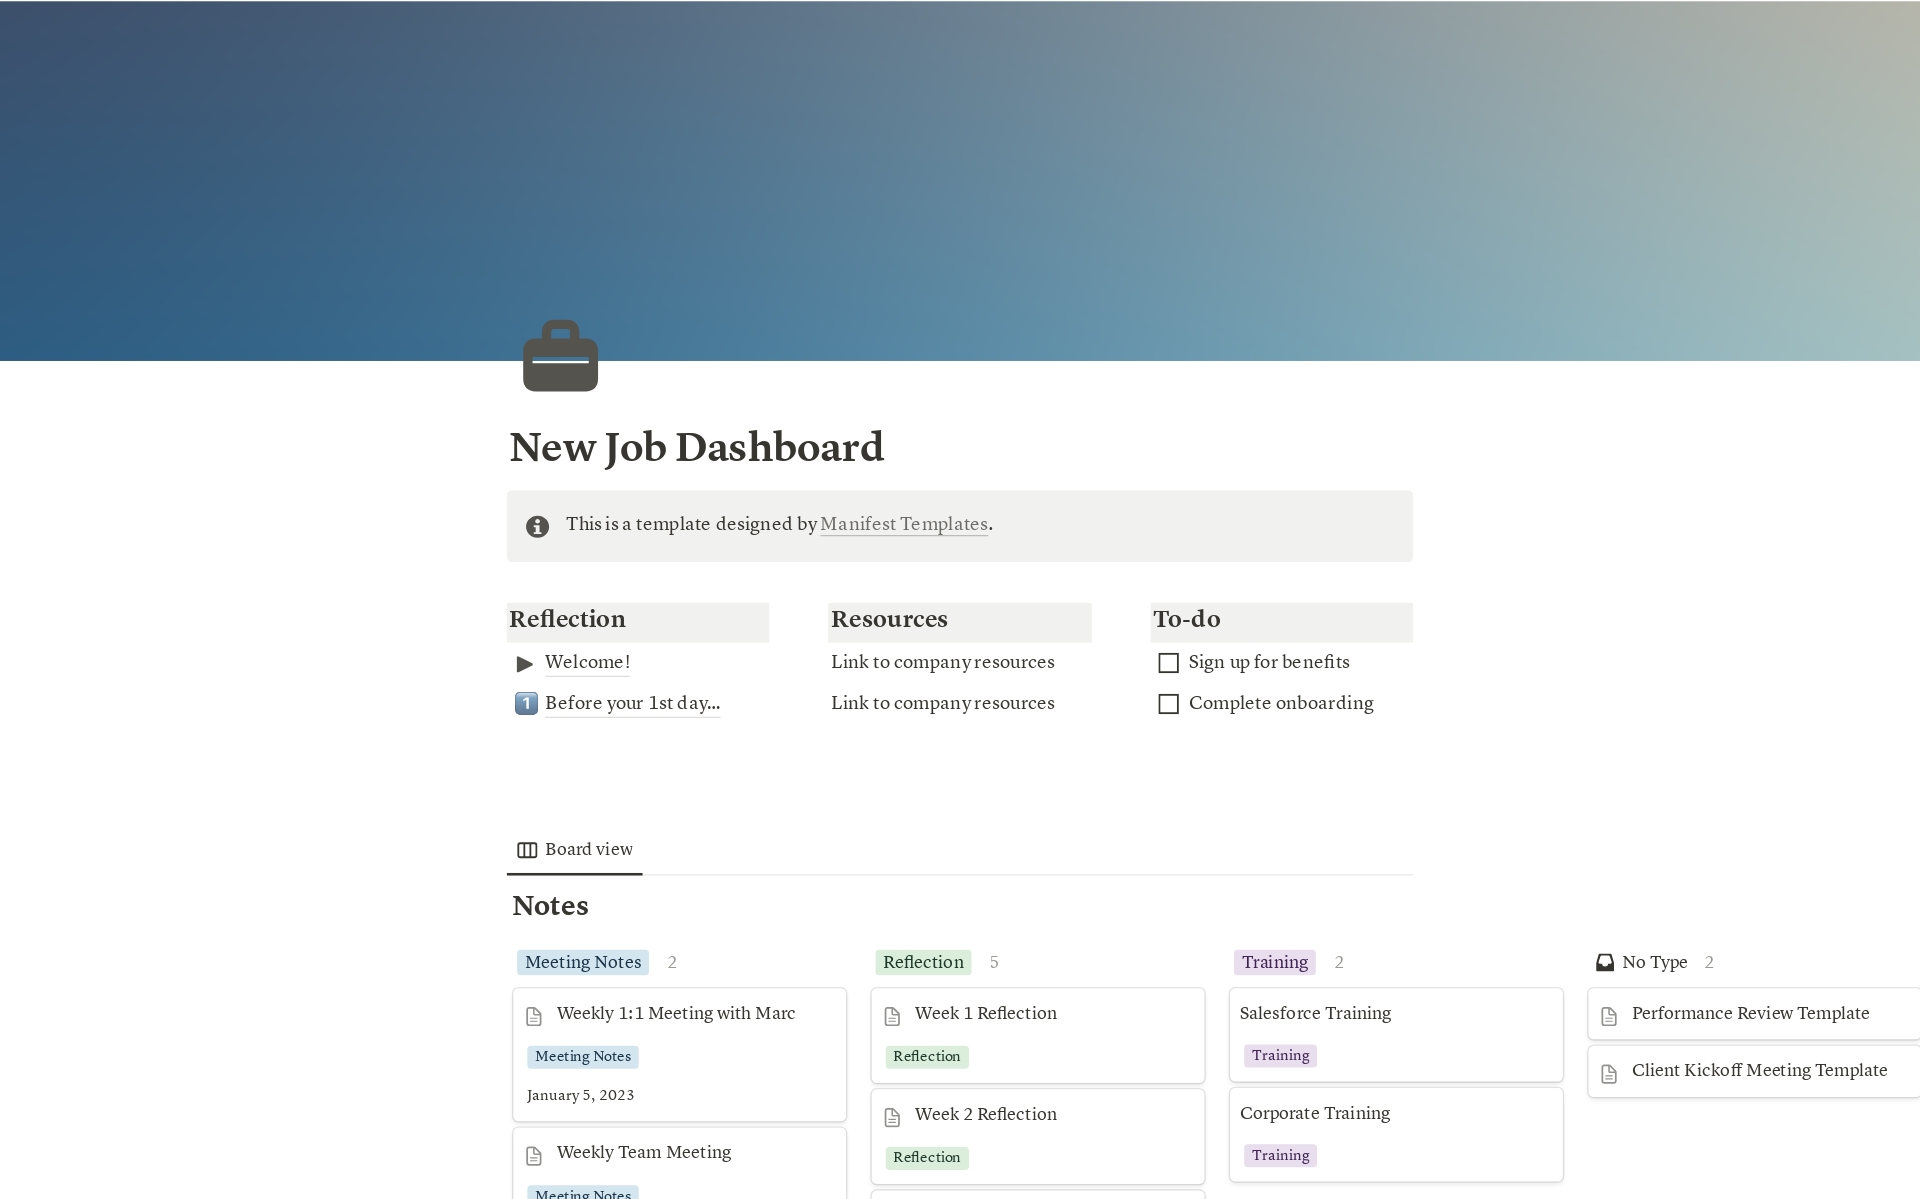 Stay organized at your new job with this work dashboard. Included meeting notes template, reflection questions prompt to track your first 30/60/90 days at the job, tips on acing your first week at the job. Starting a new job can be an exciting and daunting experience. 